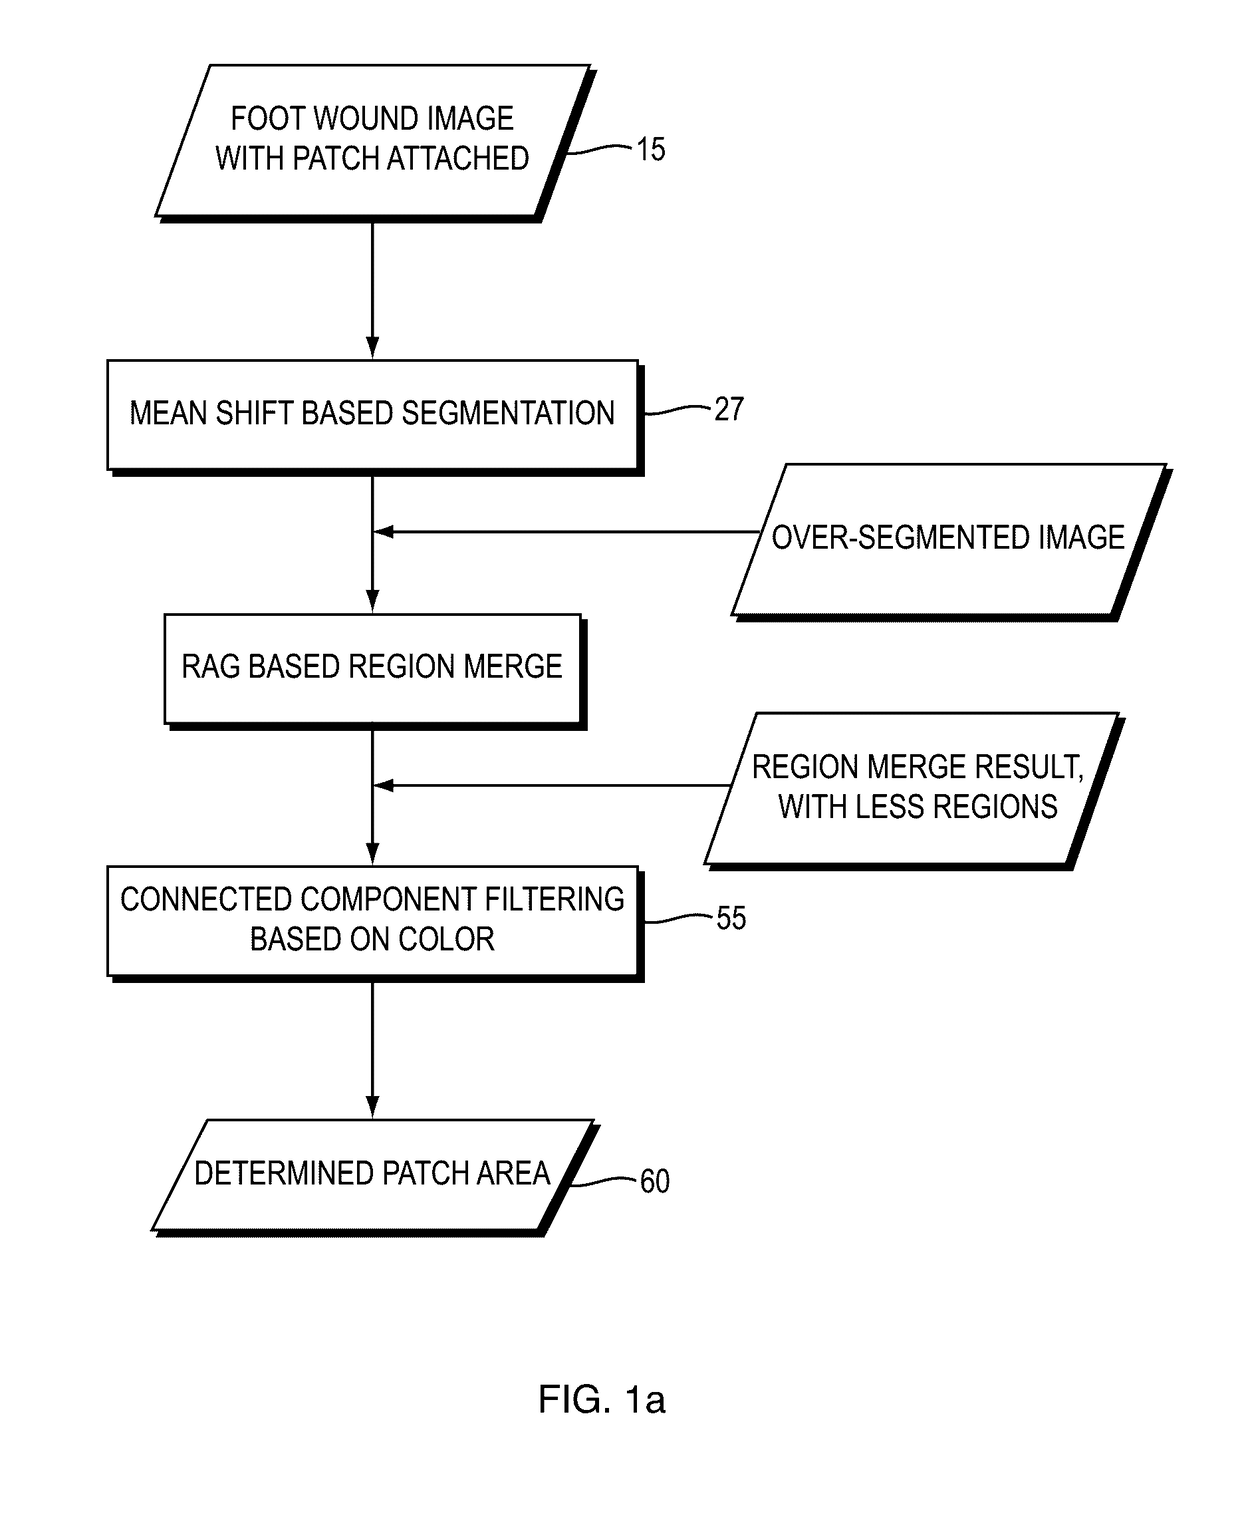 System and method for assessing wound